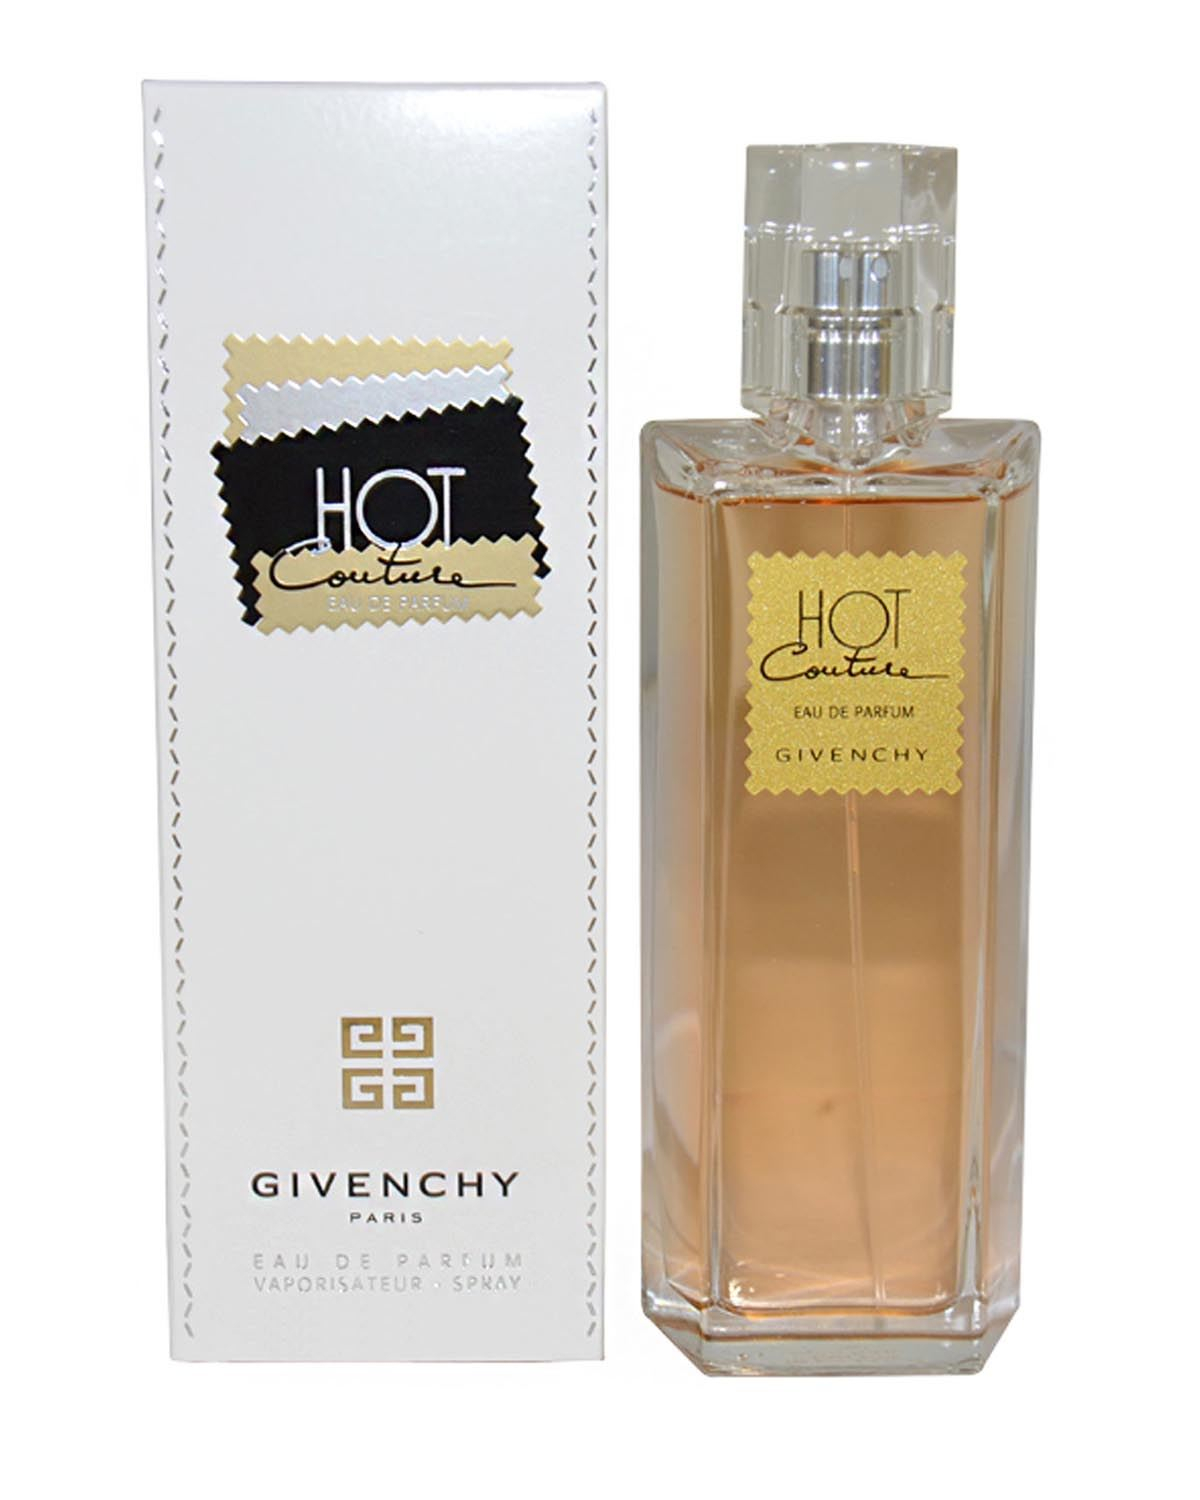 PERFUME GIVENCHY HOT COUTURE 100 ML EDP